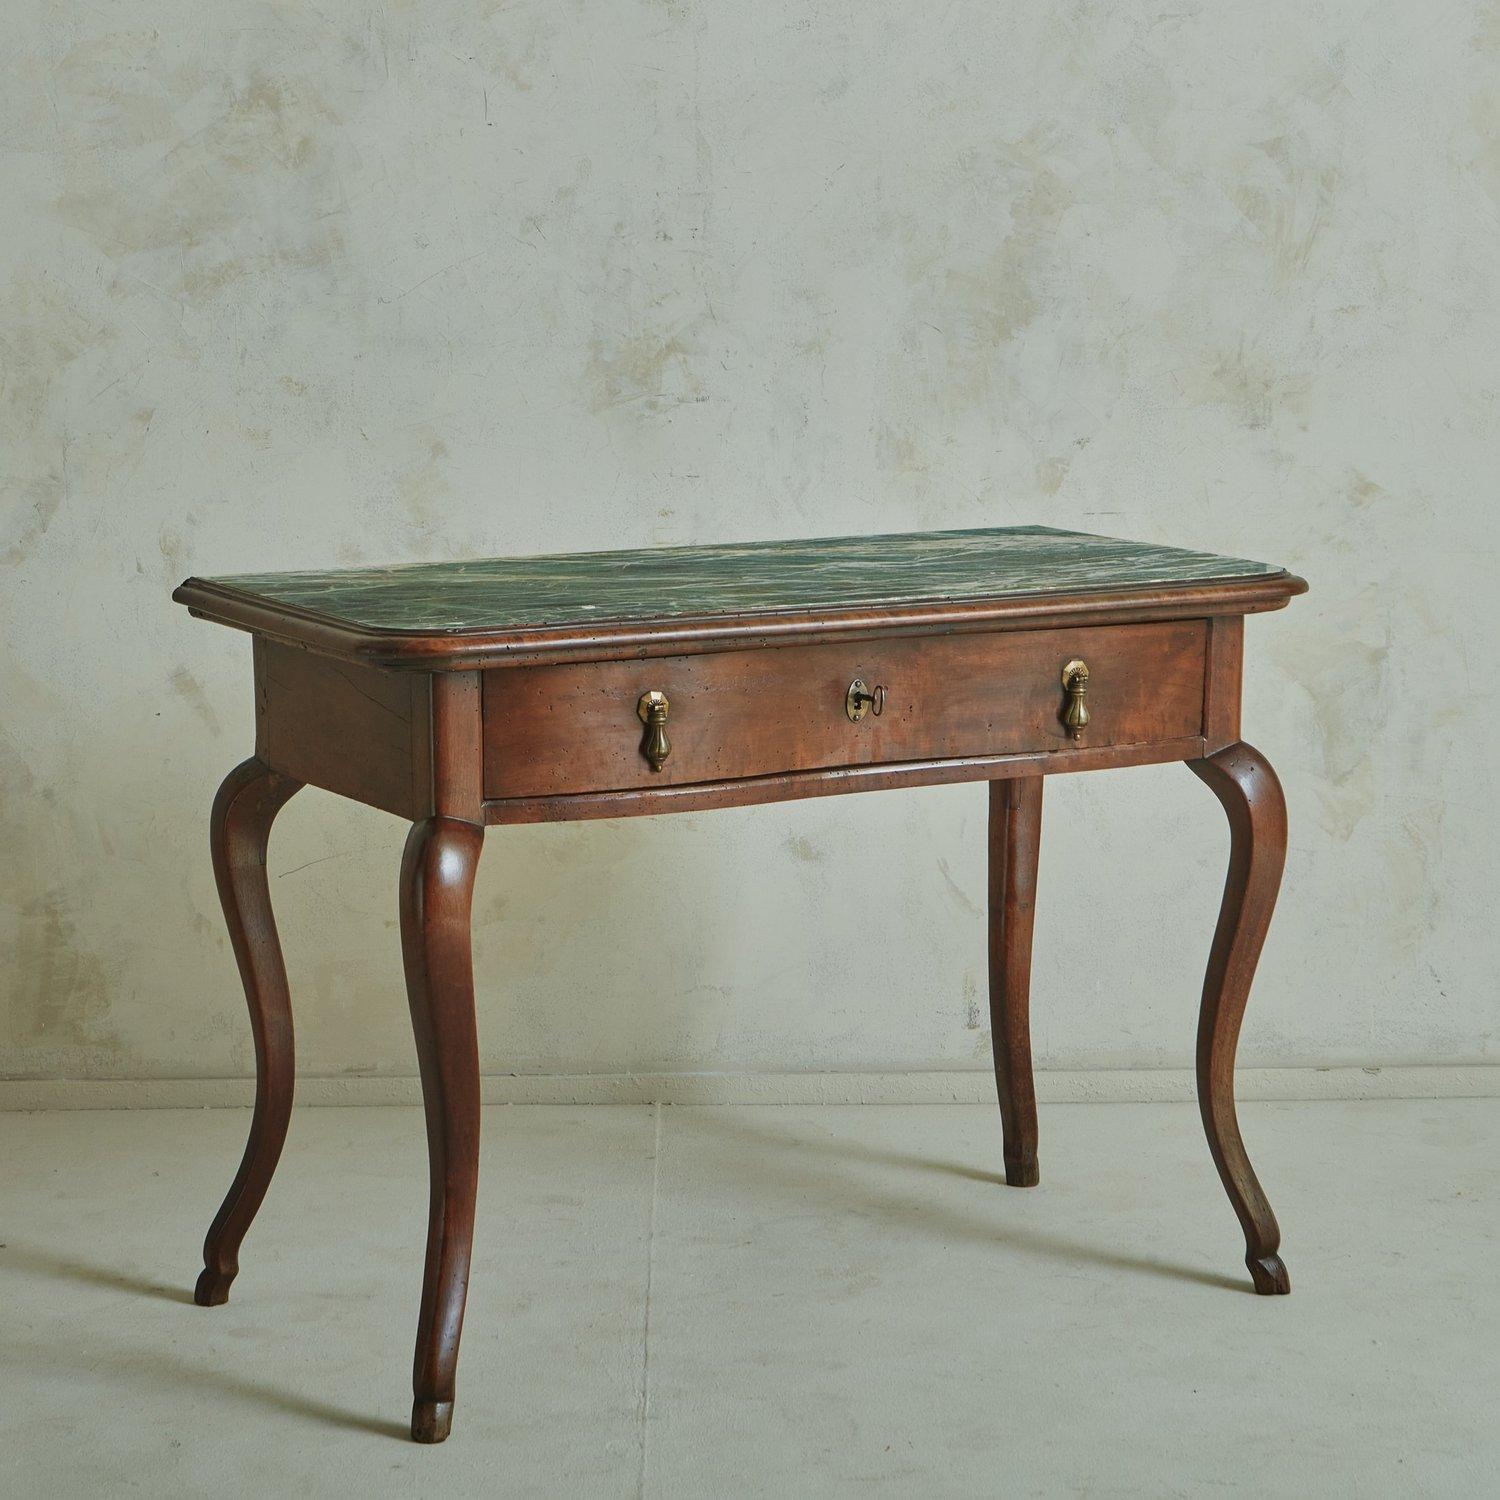 An antique Italian desk constructed with beautifully aged walnut. This piece features an inset Verde Alpi marble tabletop with gorgeous veining in a range of green and cream hues. This table stands on four sabre legs and has one drawer with